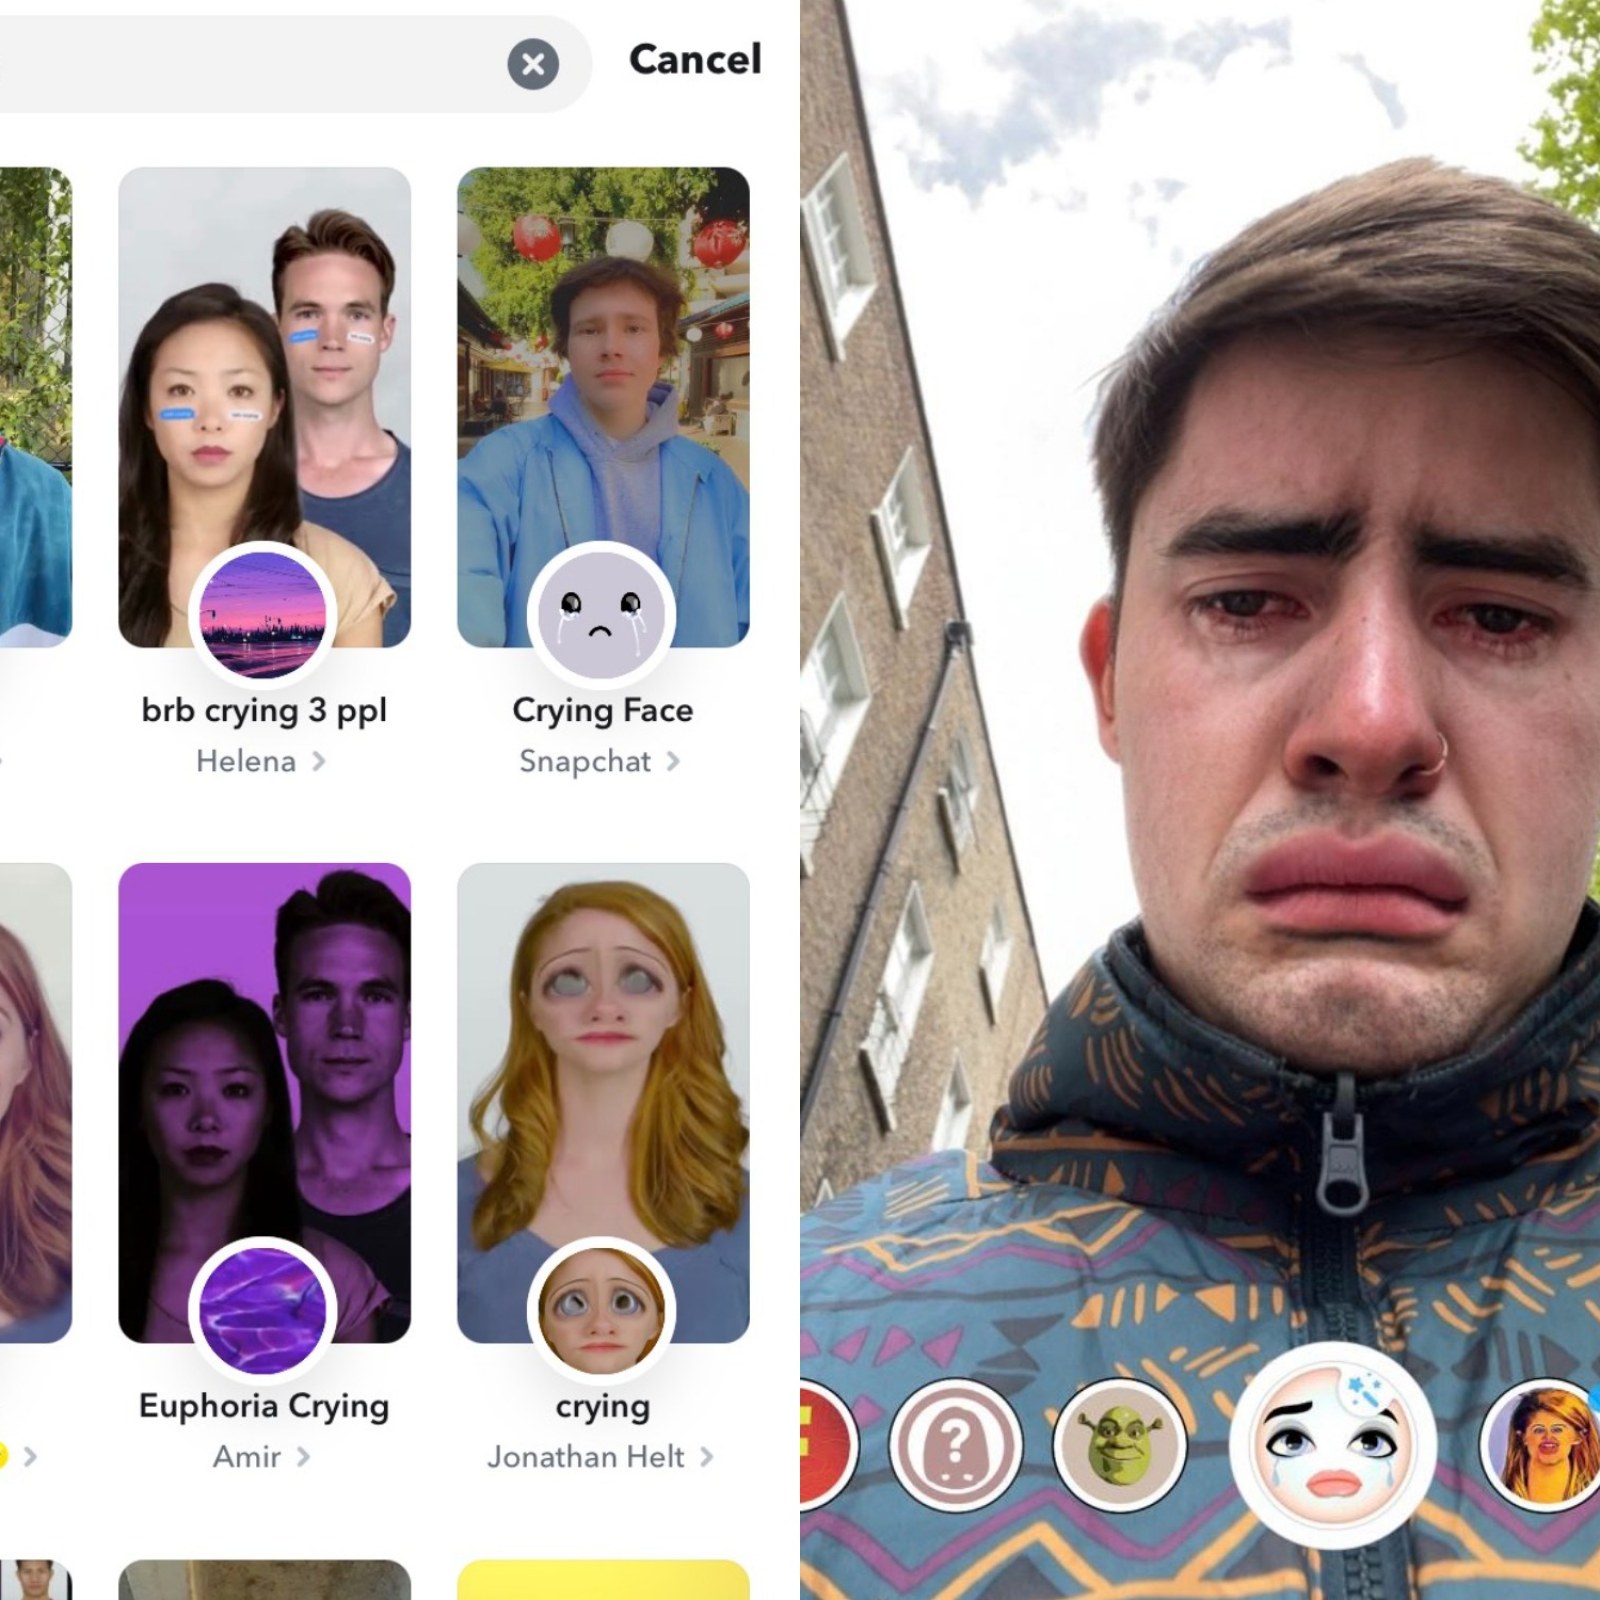 How To Get the Sad Face Filter Taking Over TikTok by Using Snapchat